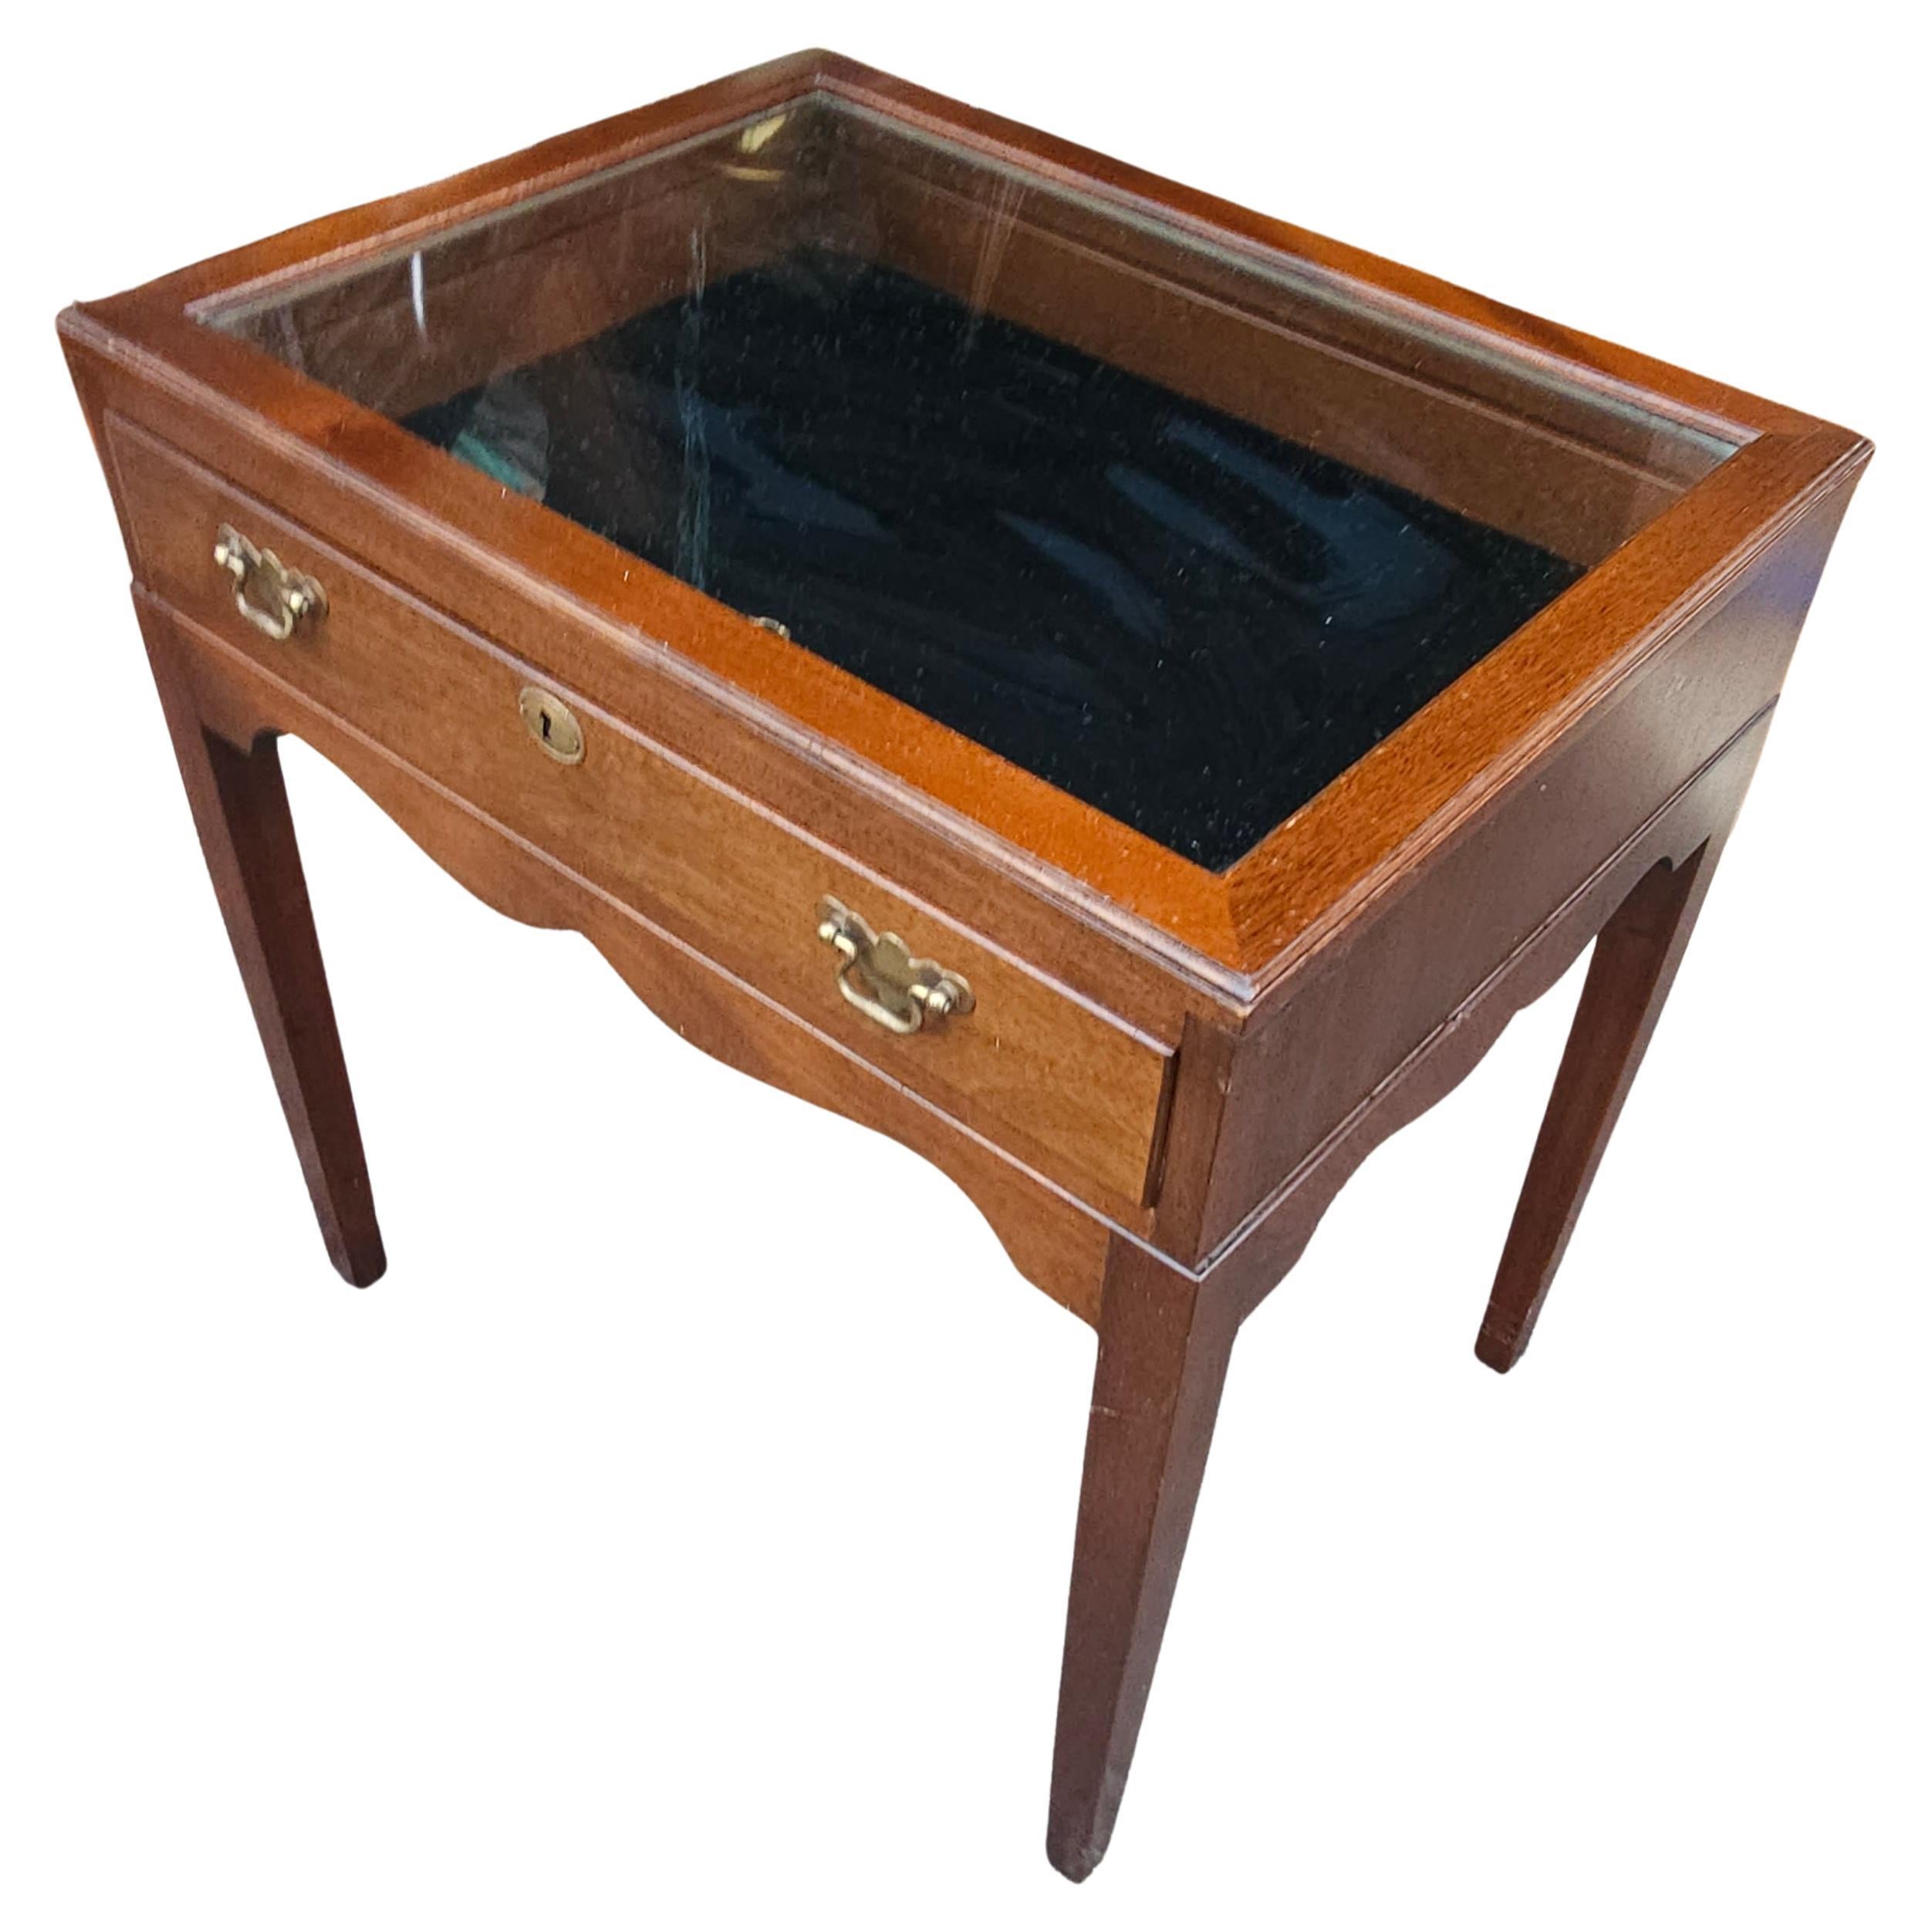 A 20th Century Mahogany and Glass Top Display Table with black velvet lining and Lock. One key present. Measures 25.75